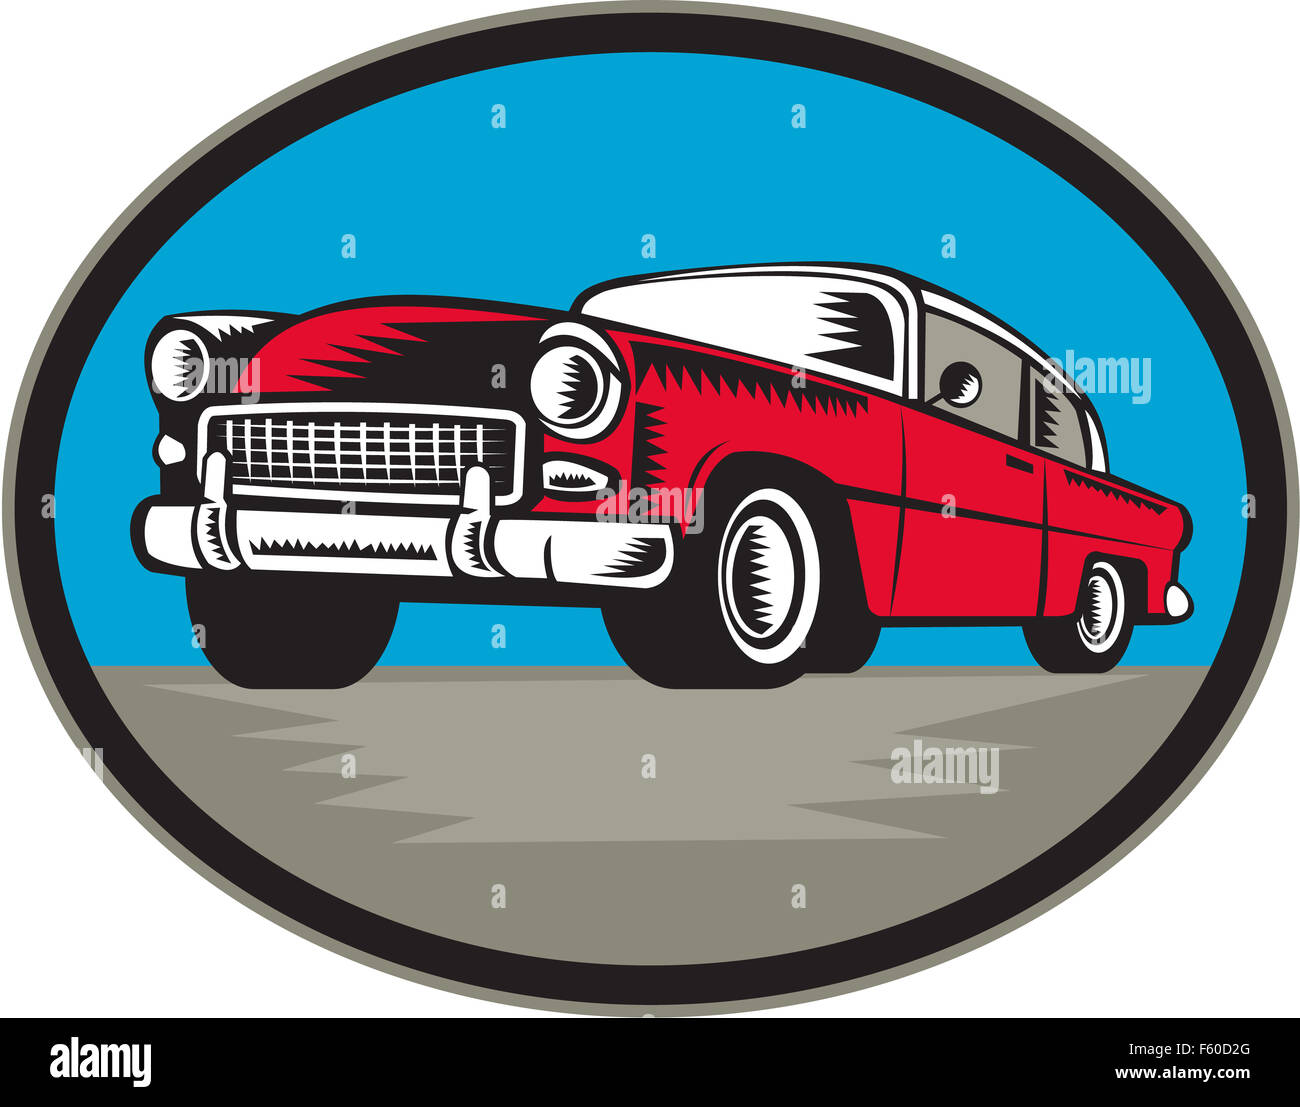 Illustration of a vintage classic car viewed from low angle set inside oval shape done in retro woodcut style. Stock Photo